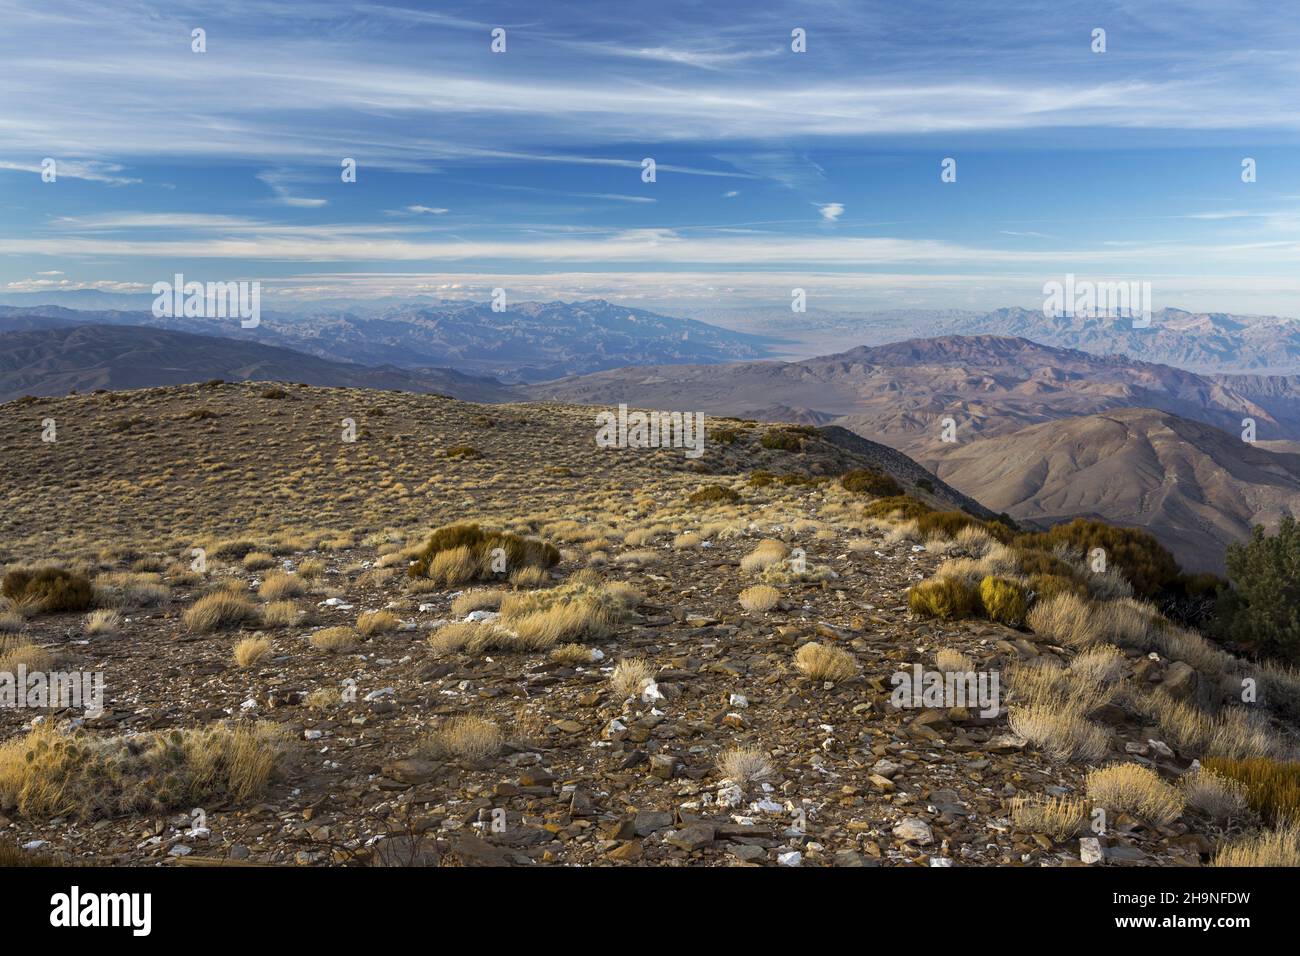 Distant Aerial Landscape View from Wildrose Mountain Peak across Death Valley National Park in California with Distant Sierra Nevada Mountains Skyline Stock Photo